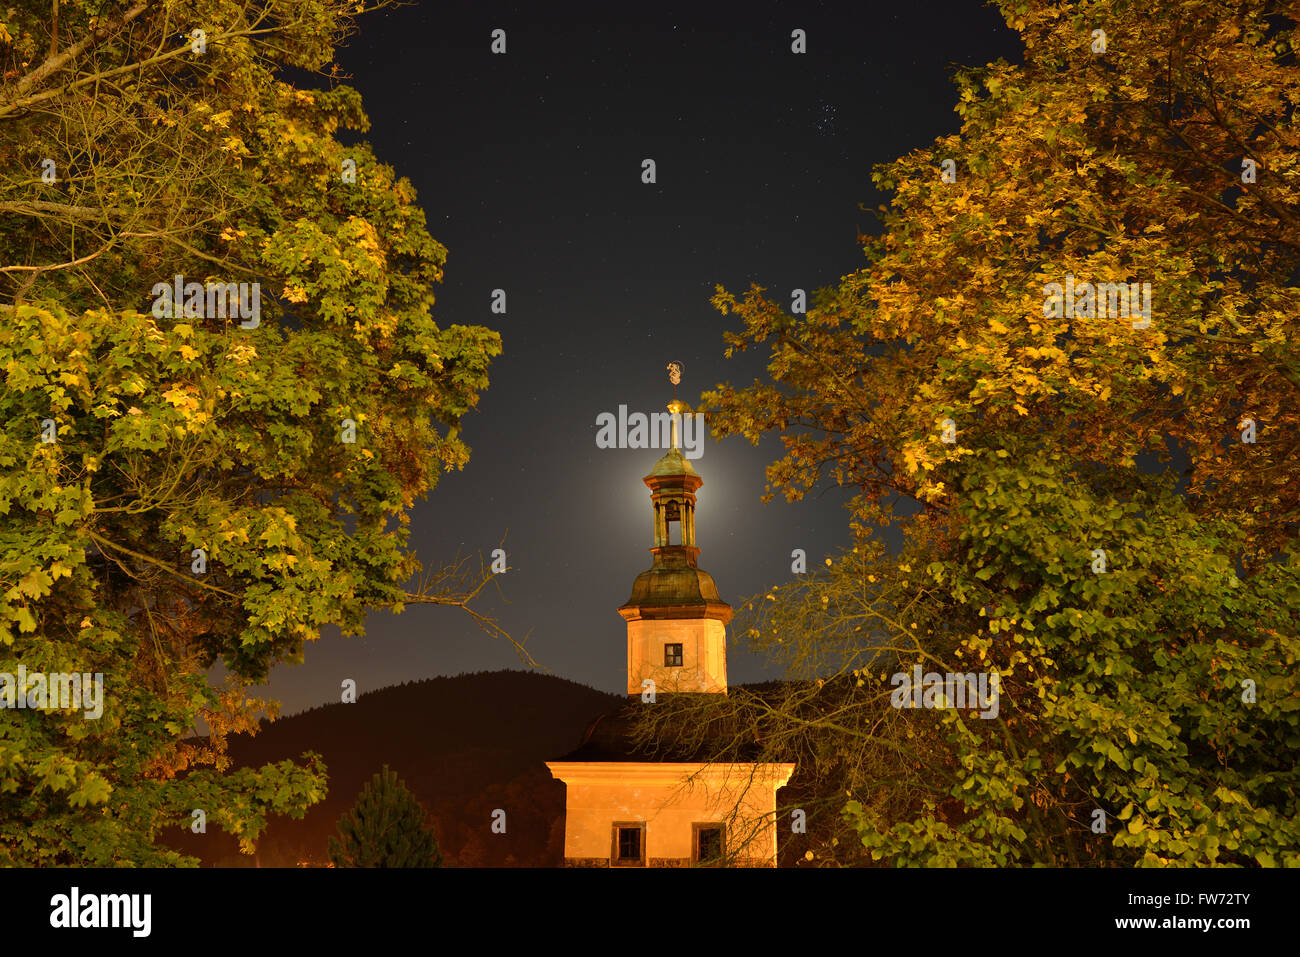 Church and foliage illuminated by street lights with the moon behind the steeple. Loket, Sokolov District, Bohemia, Czech Republic. Stock Photo